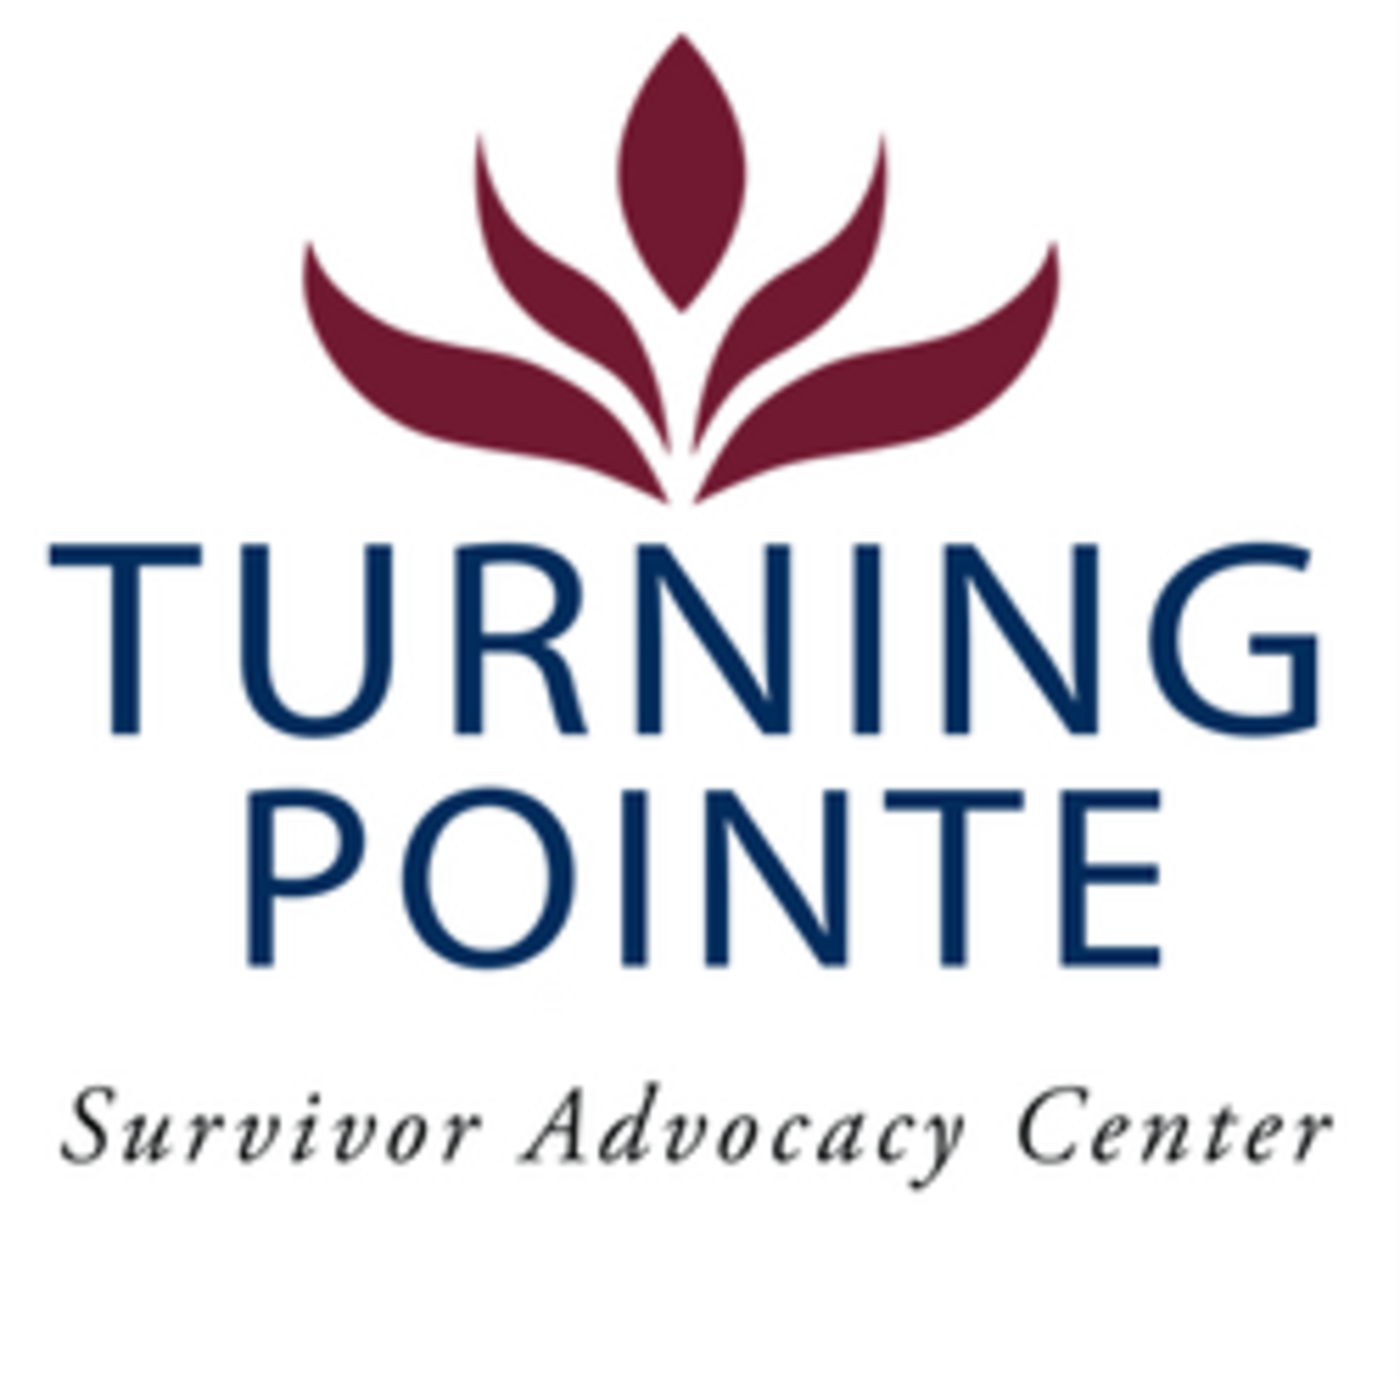 logo for Turning Pointe